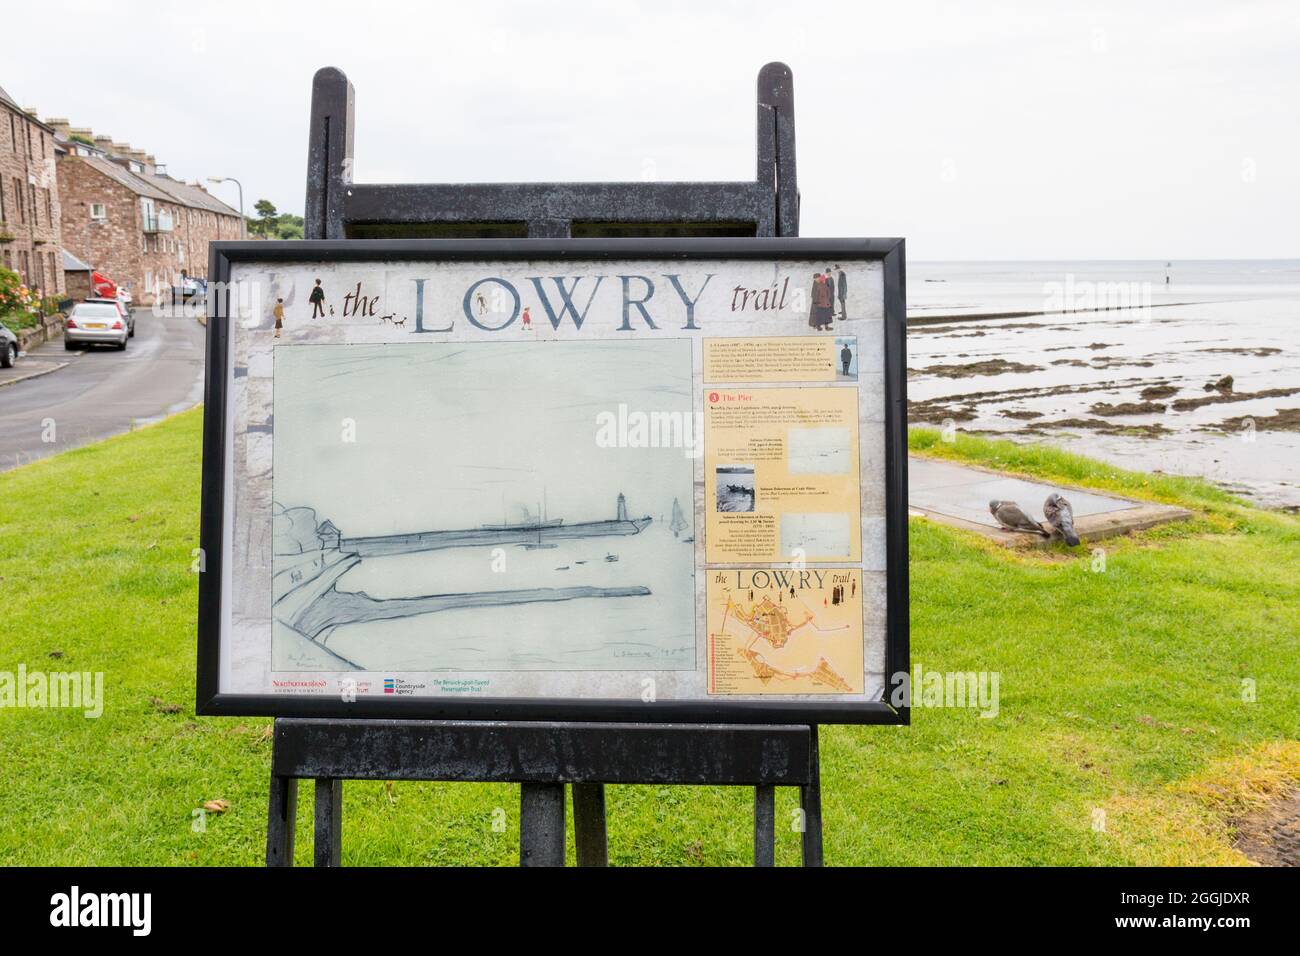 A sign for the Lowry trail at Berwick-upon-Tweed, during the summer of 2014 Stock Photo